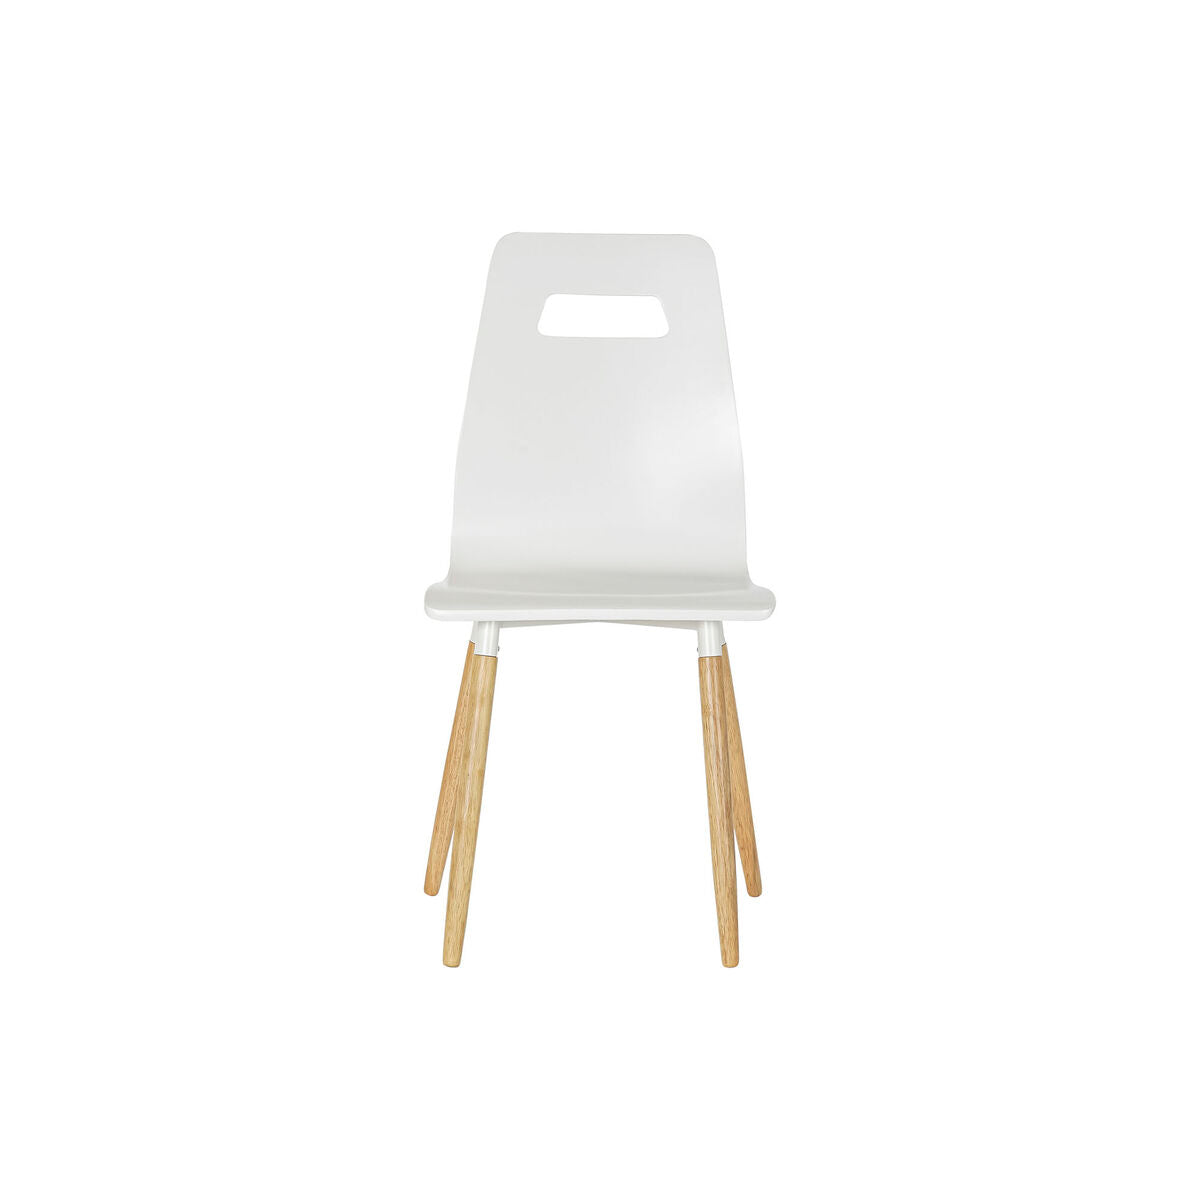 Dining Chair DKD Home Decor 43 x 50 x 88 cm Wood White Natural rubber Light brown